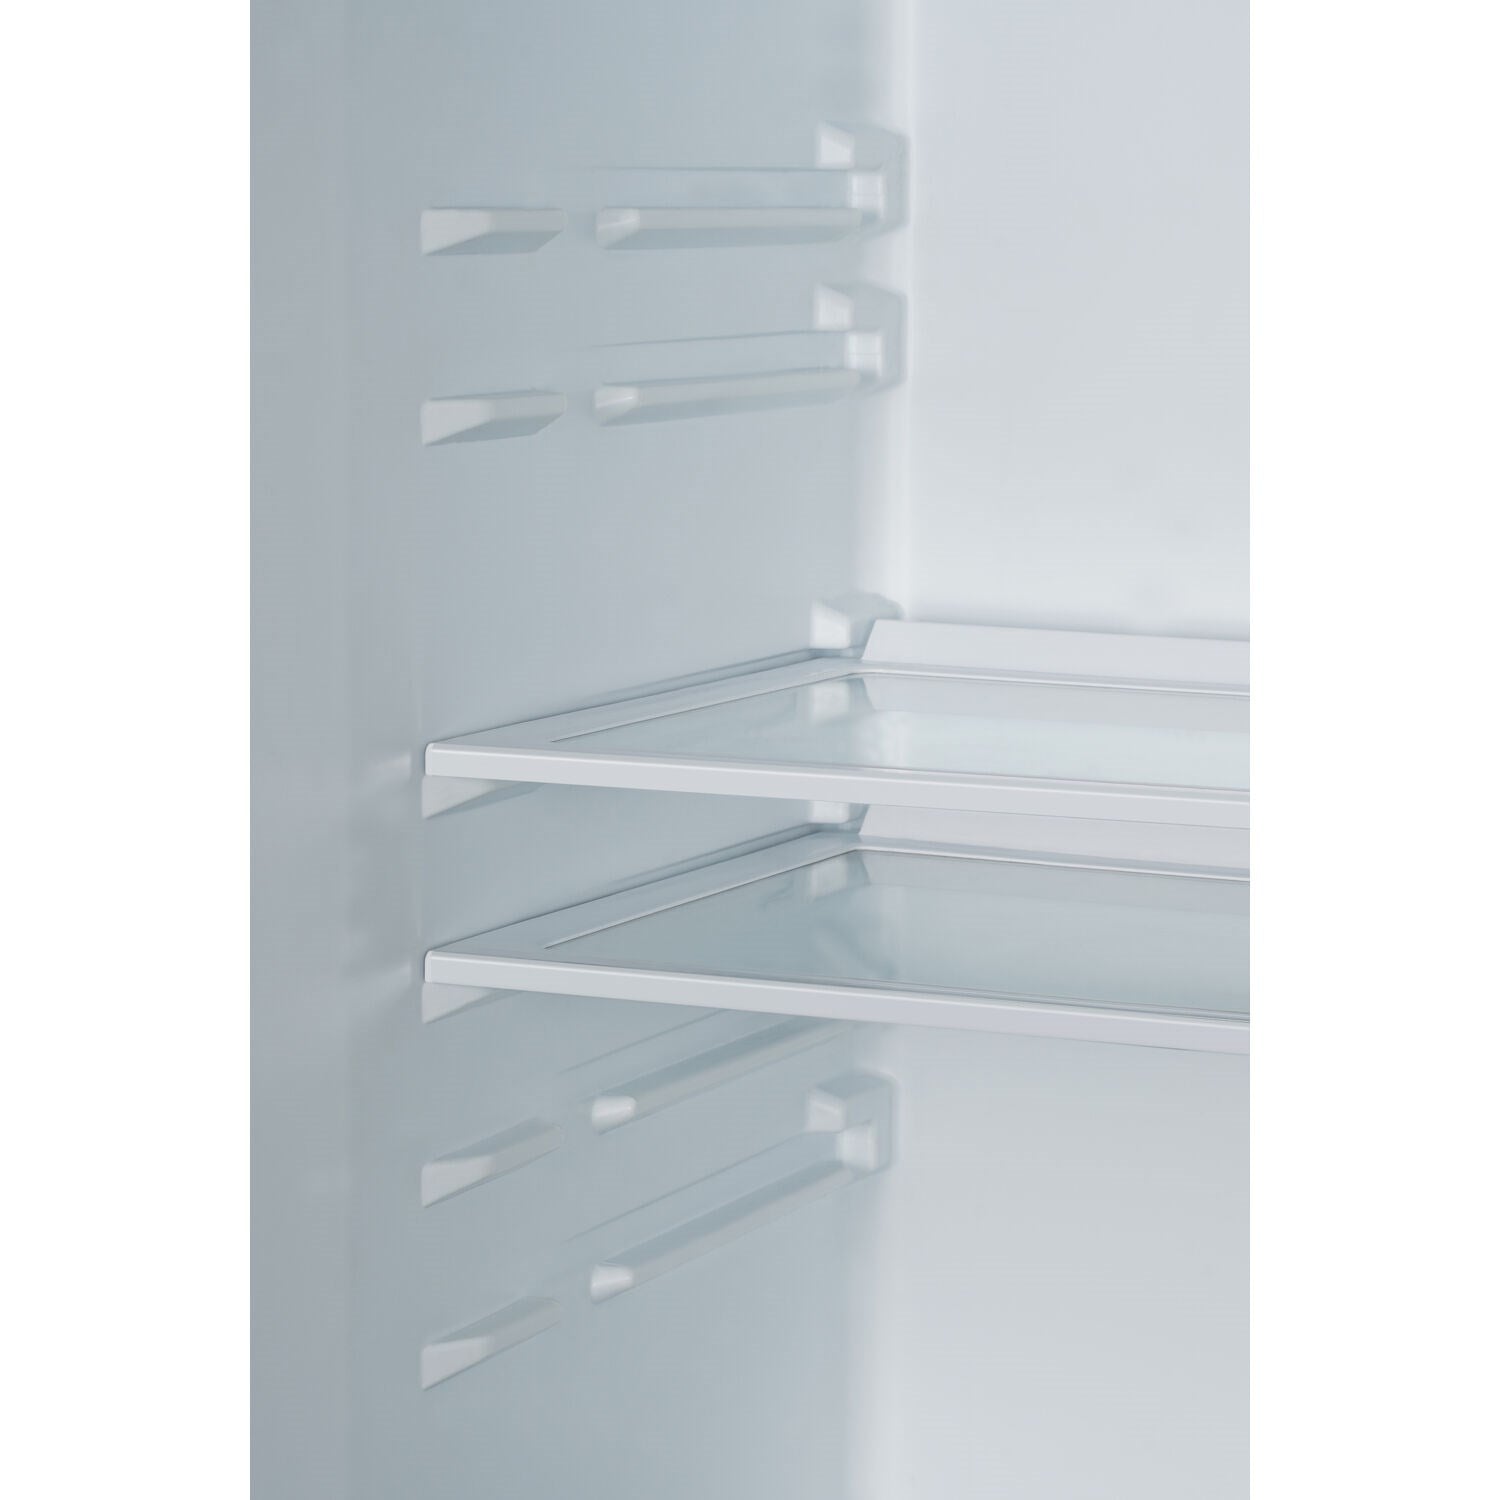 Galanz 16-cu ft Counter-depth French Door Refrigerator (Stainless Steel) in  the French Door Refrigerators department at